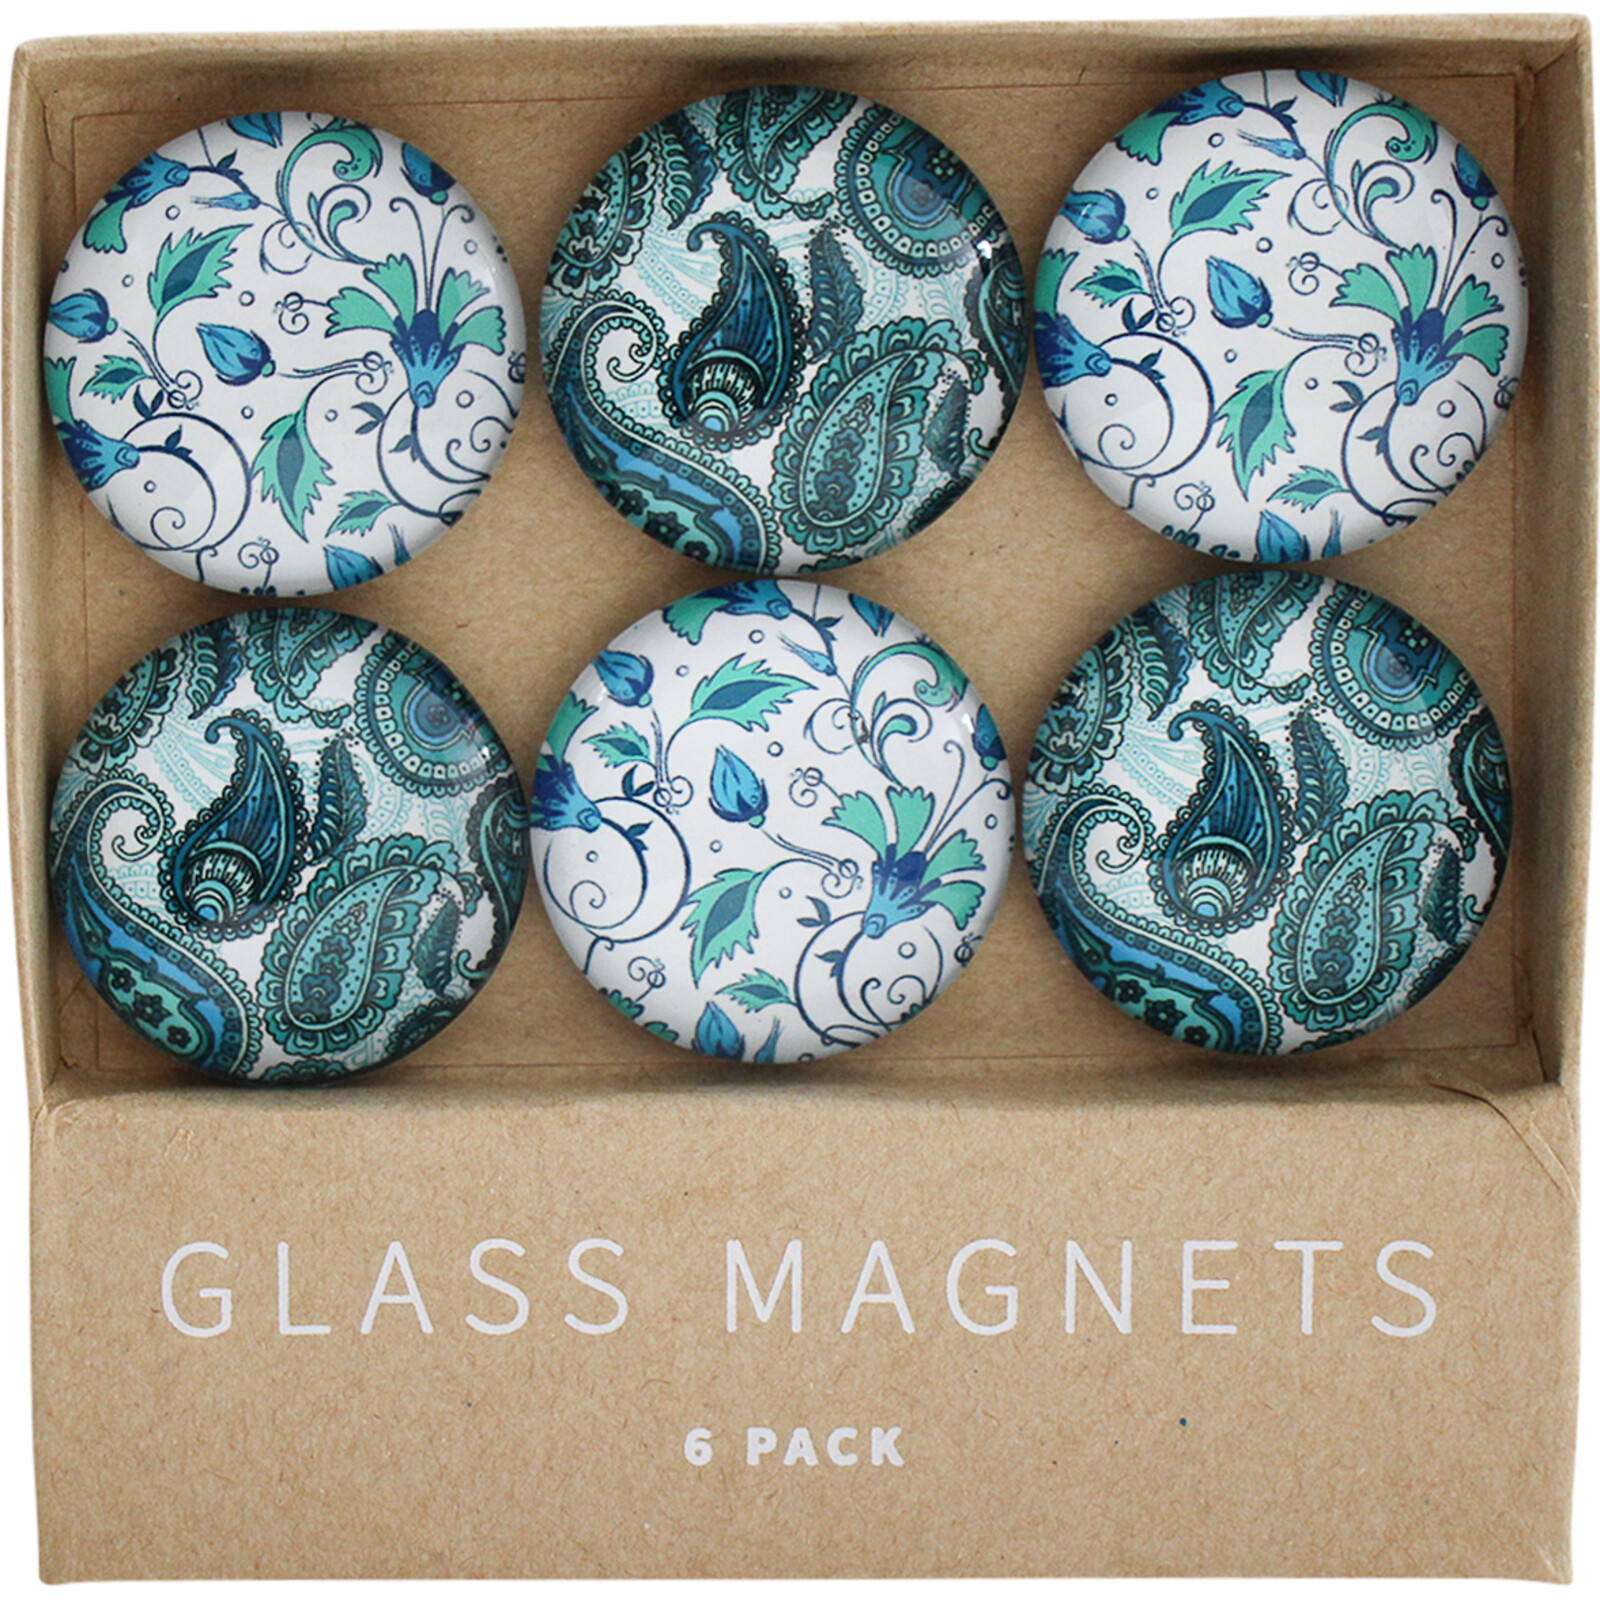 Glass Magnets Mixed PaisleyS/6